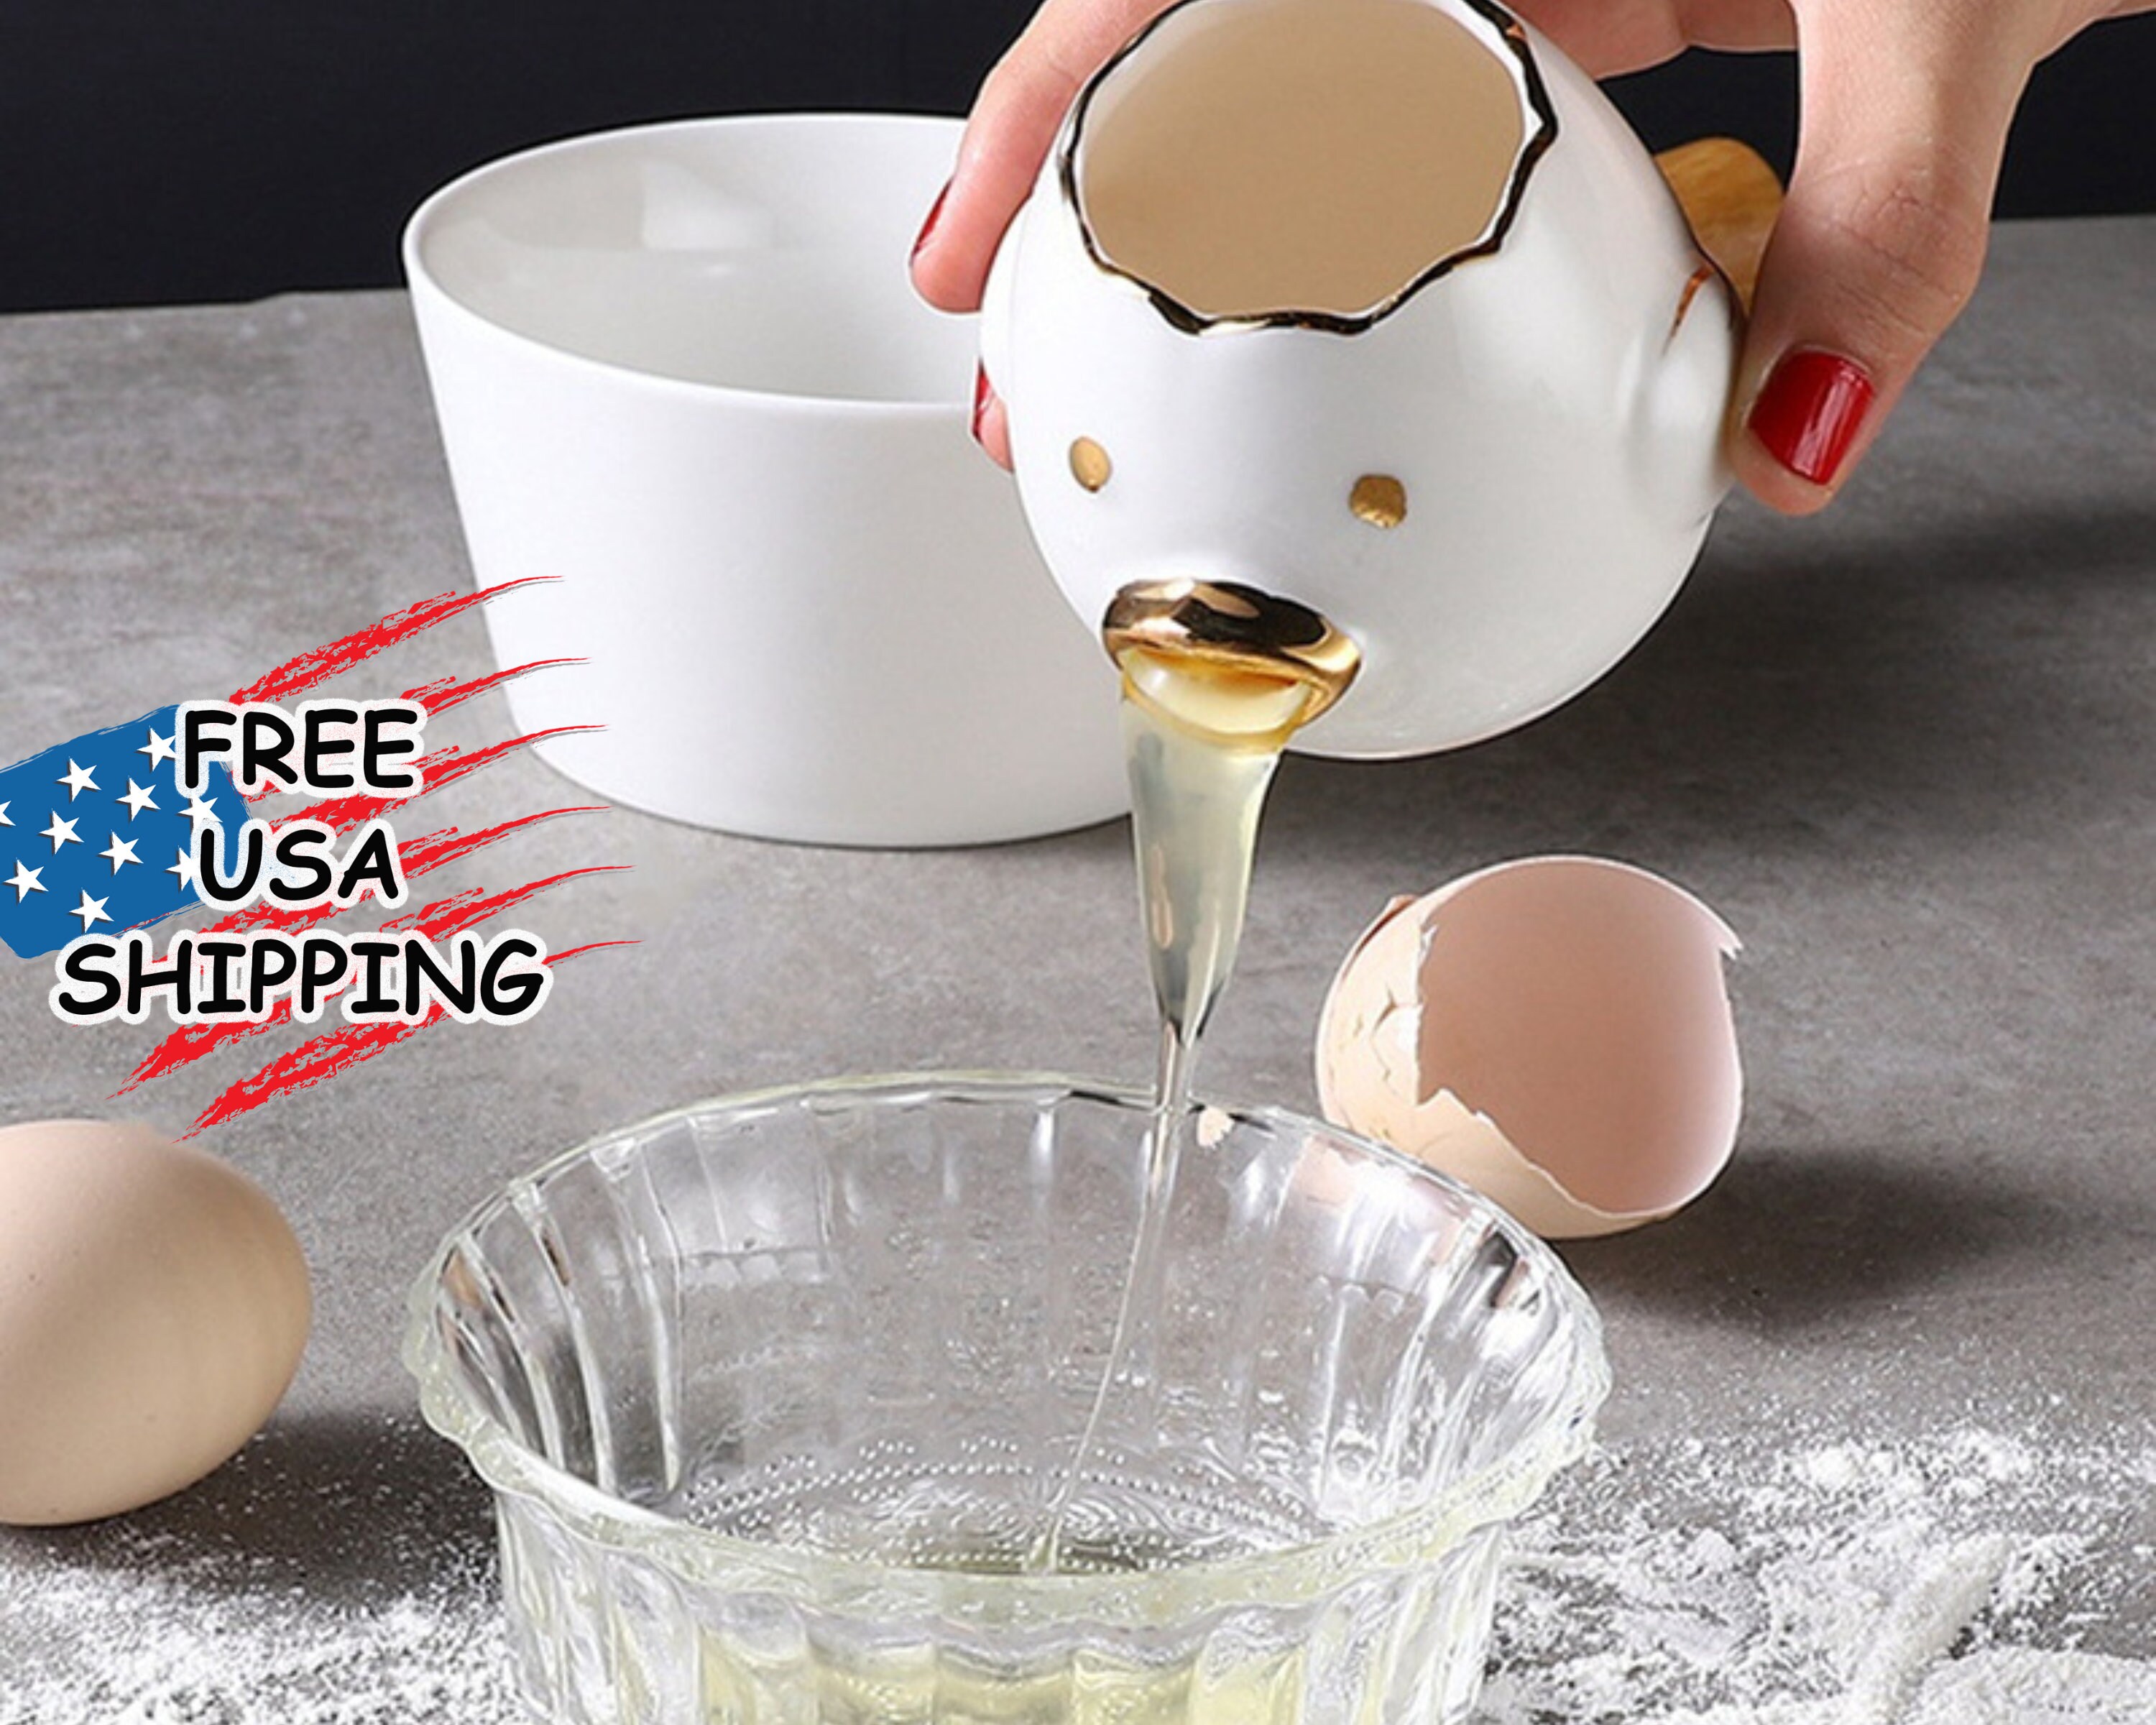 Ewell Silicone Egg Separator Yolk Extractor Kitchen Tool Gadget for Separating Yolk and White 1PCS Pink 